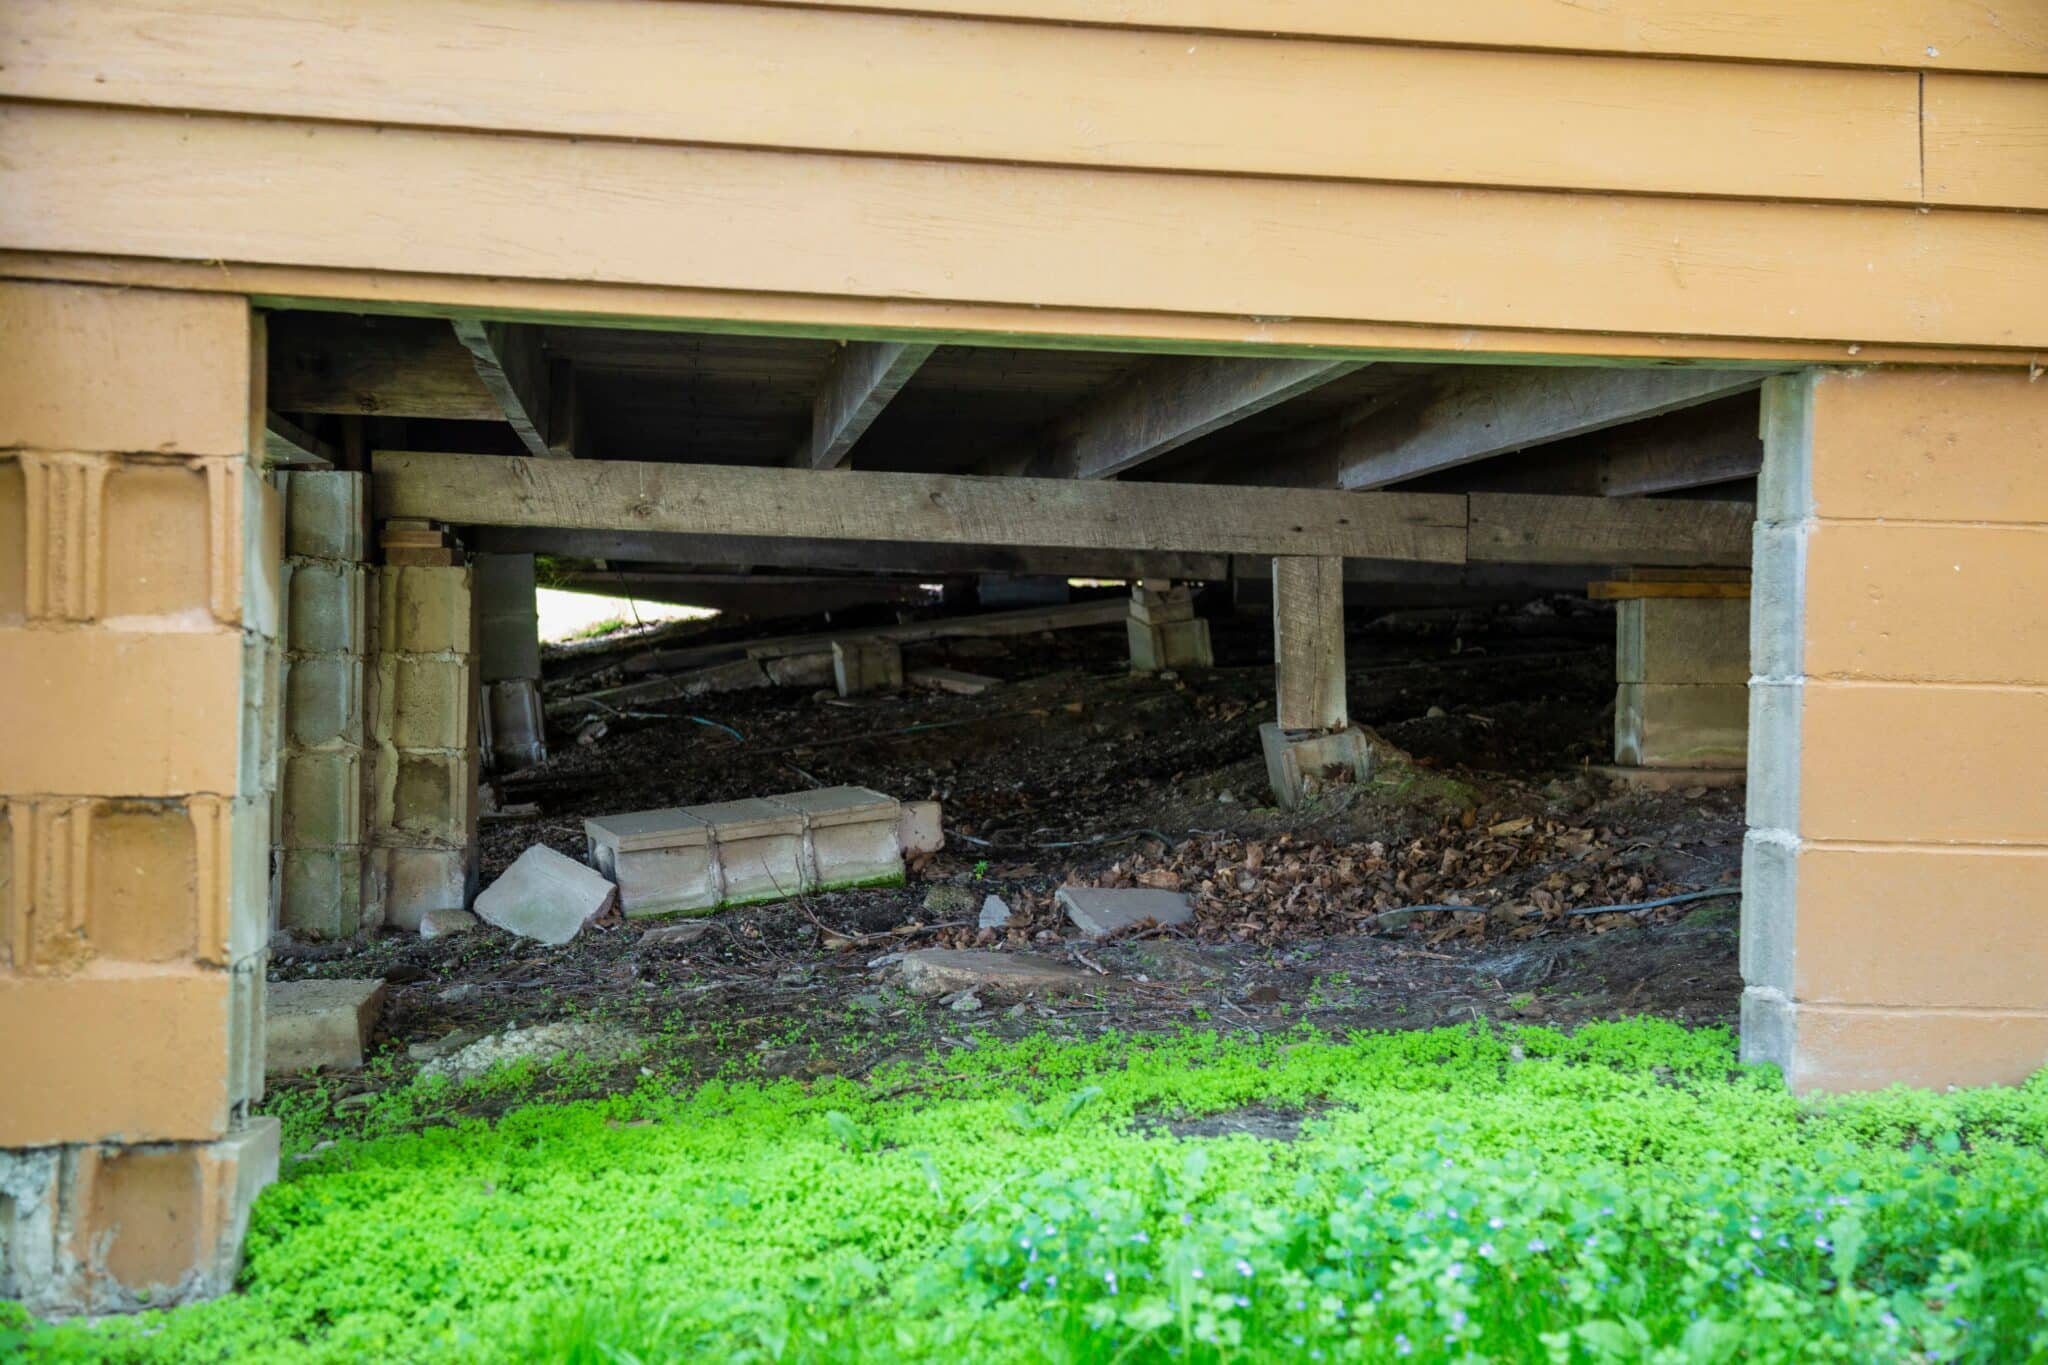 Does your crawlspace inspection leave you open to a foundation claim?